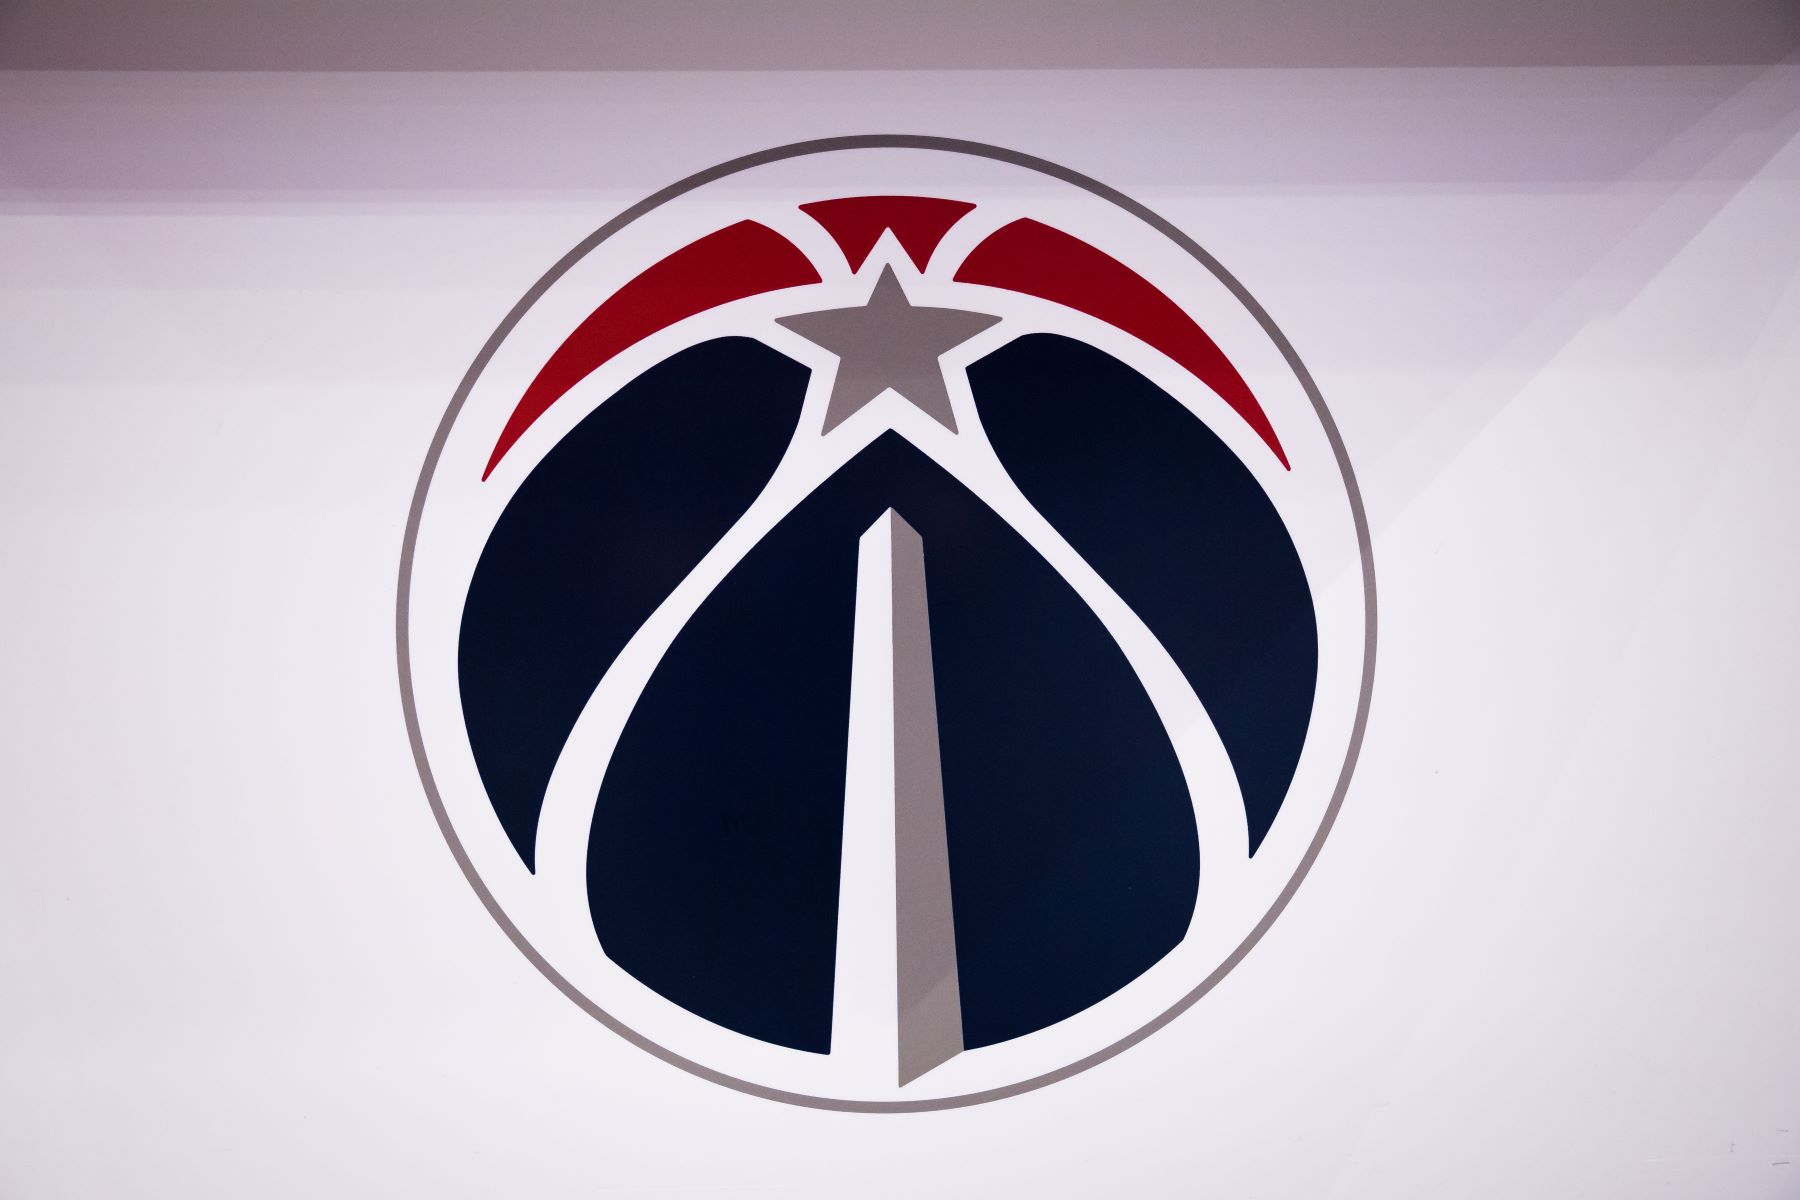 Are the Washington Wizards From Washington, Maryland, or D.C.?